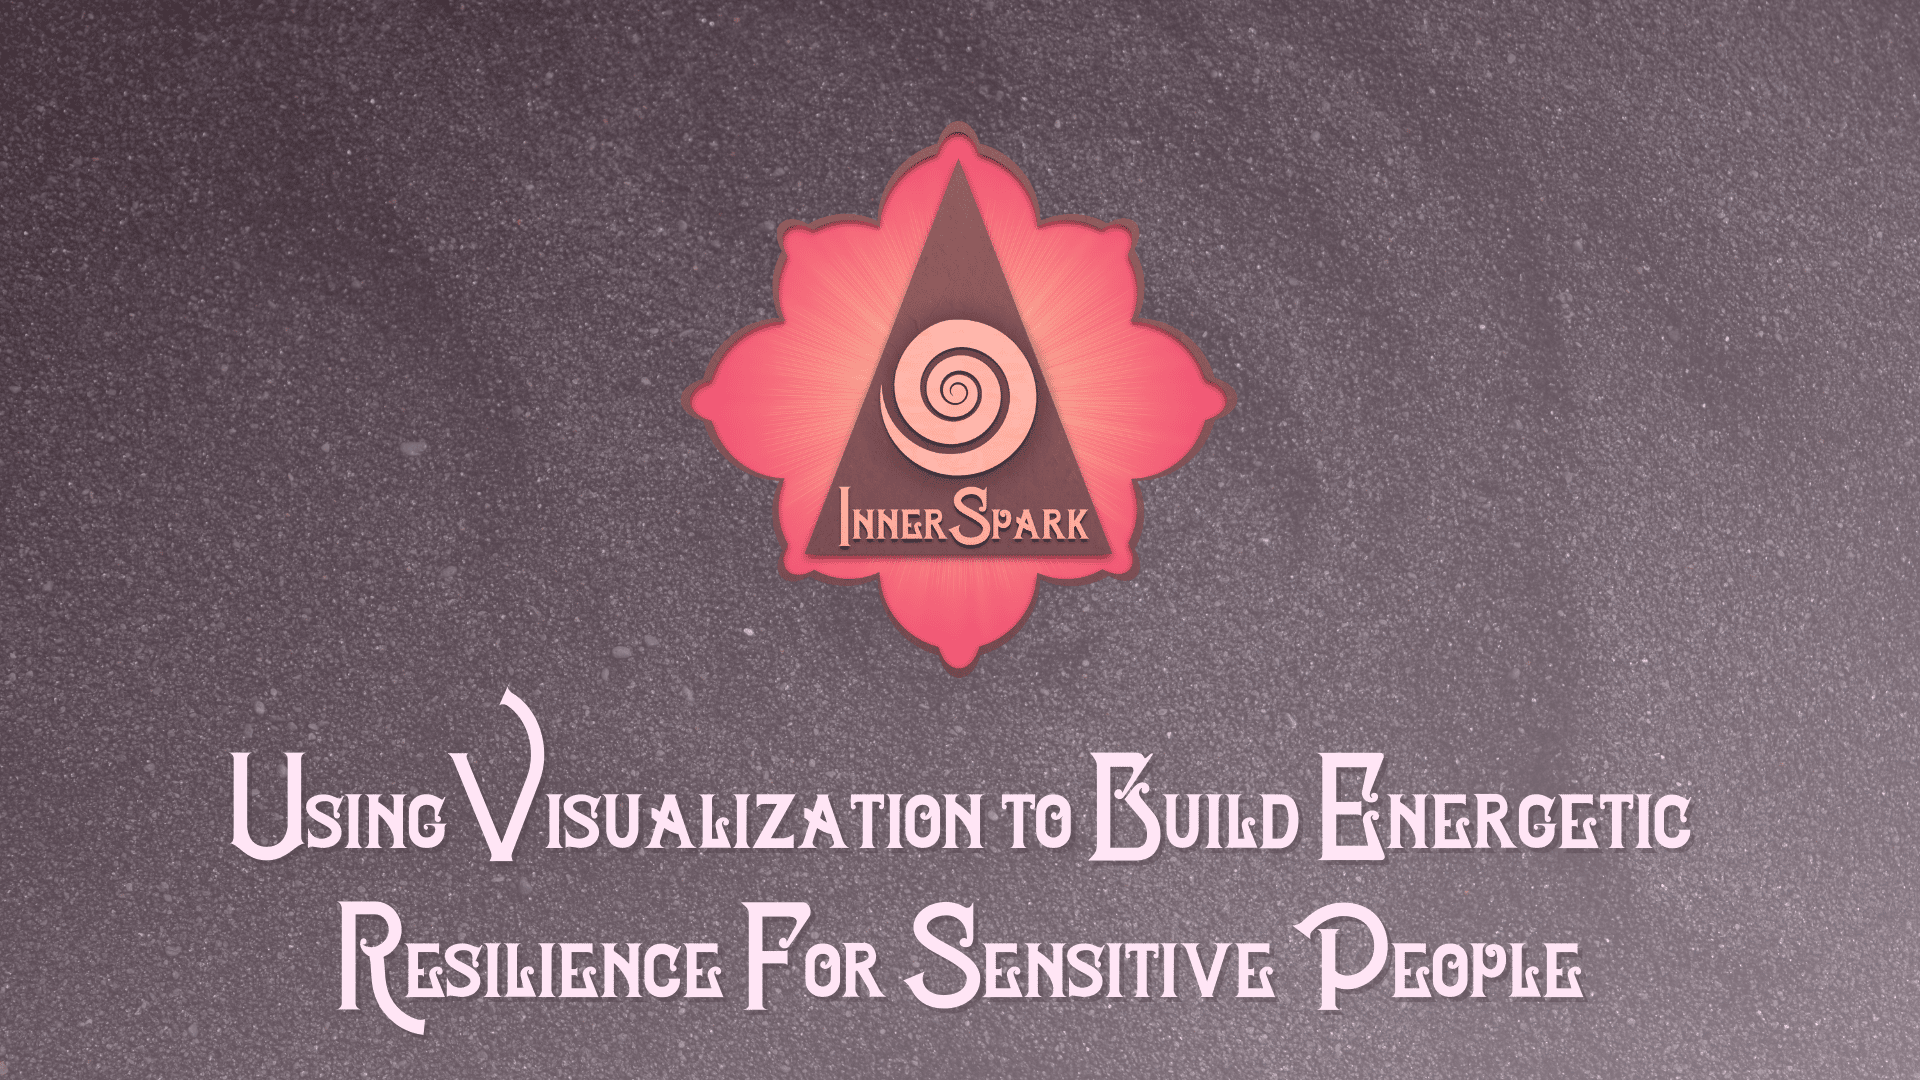 2 Ways to Use Visualization to Build Energetic Resilience For Sensitive People